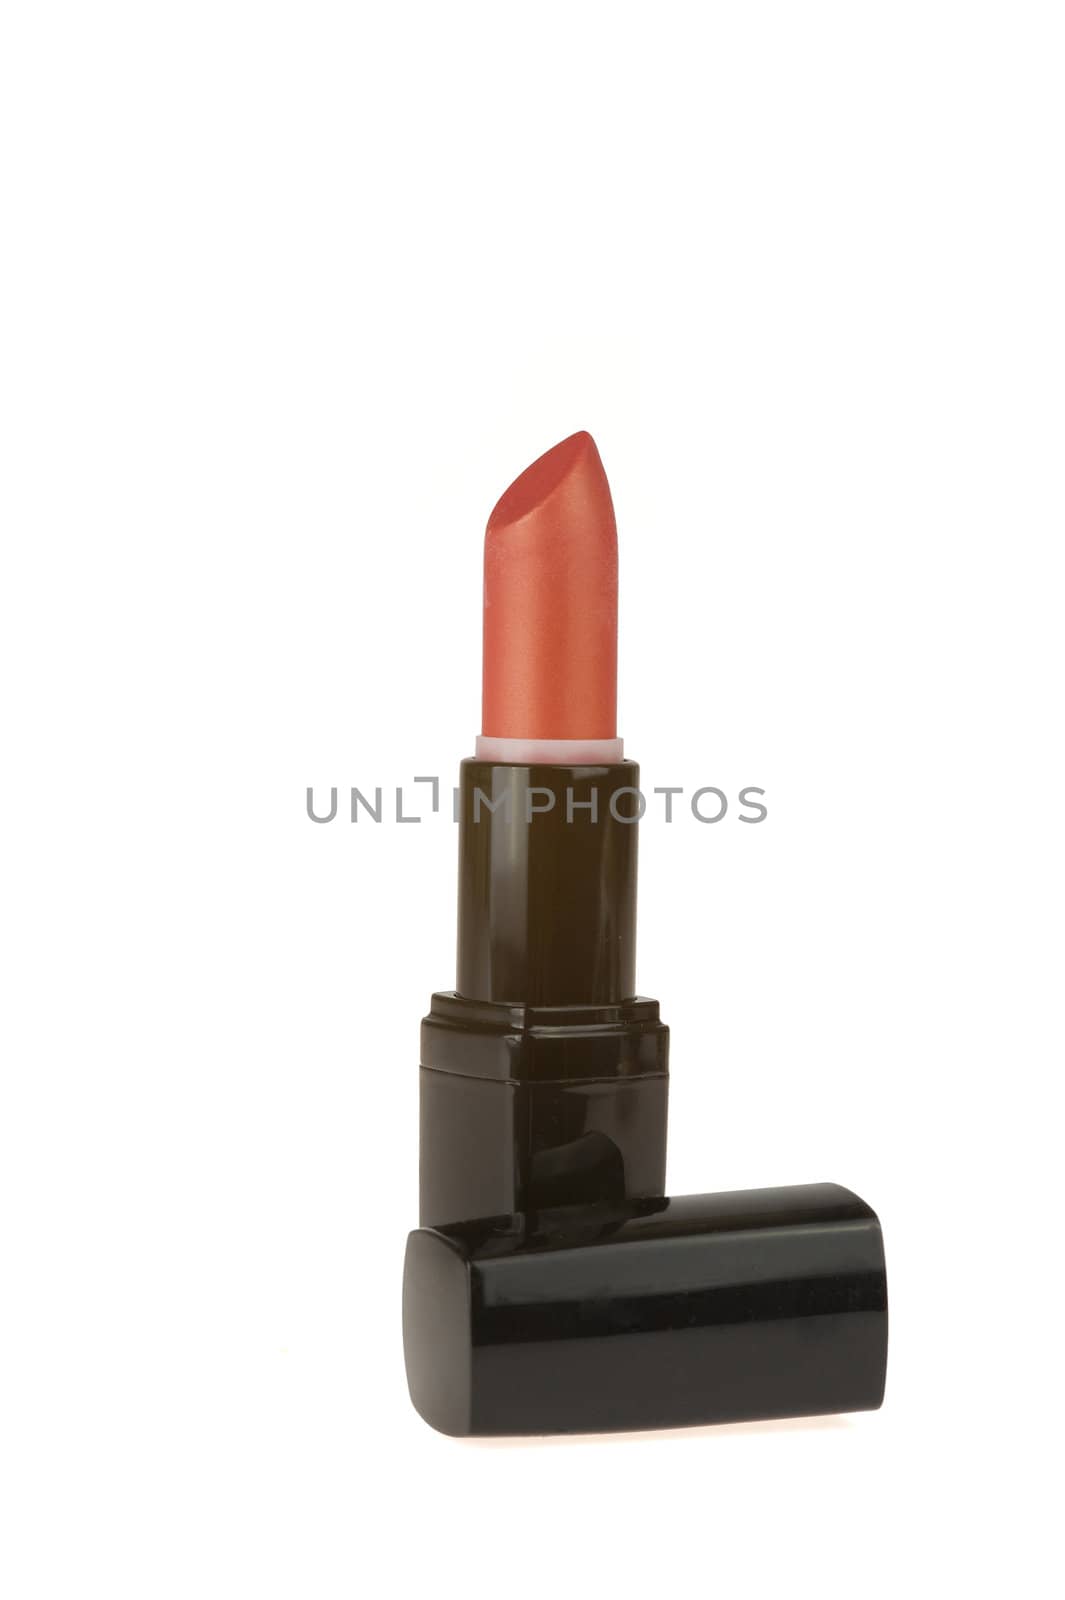 a red lipstick on a white background